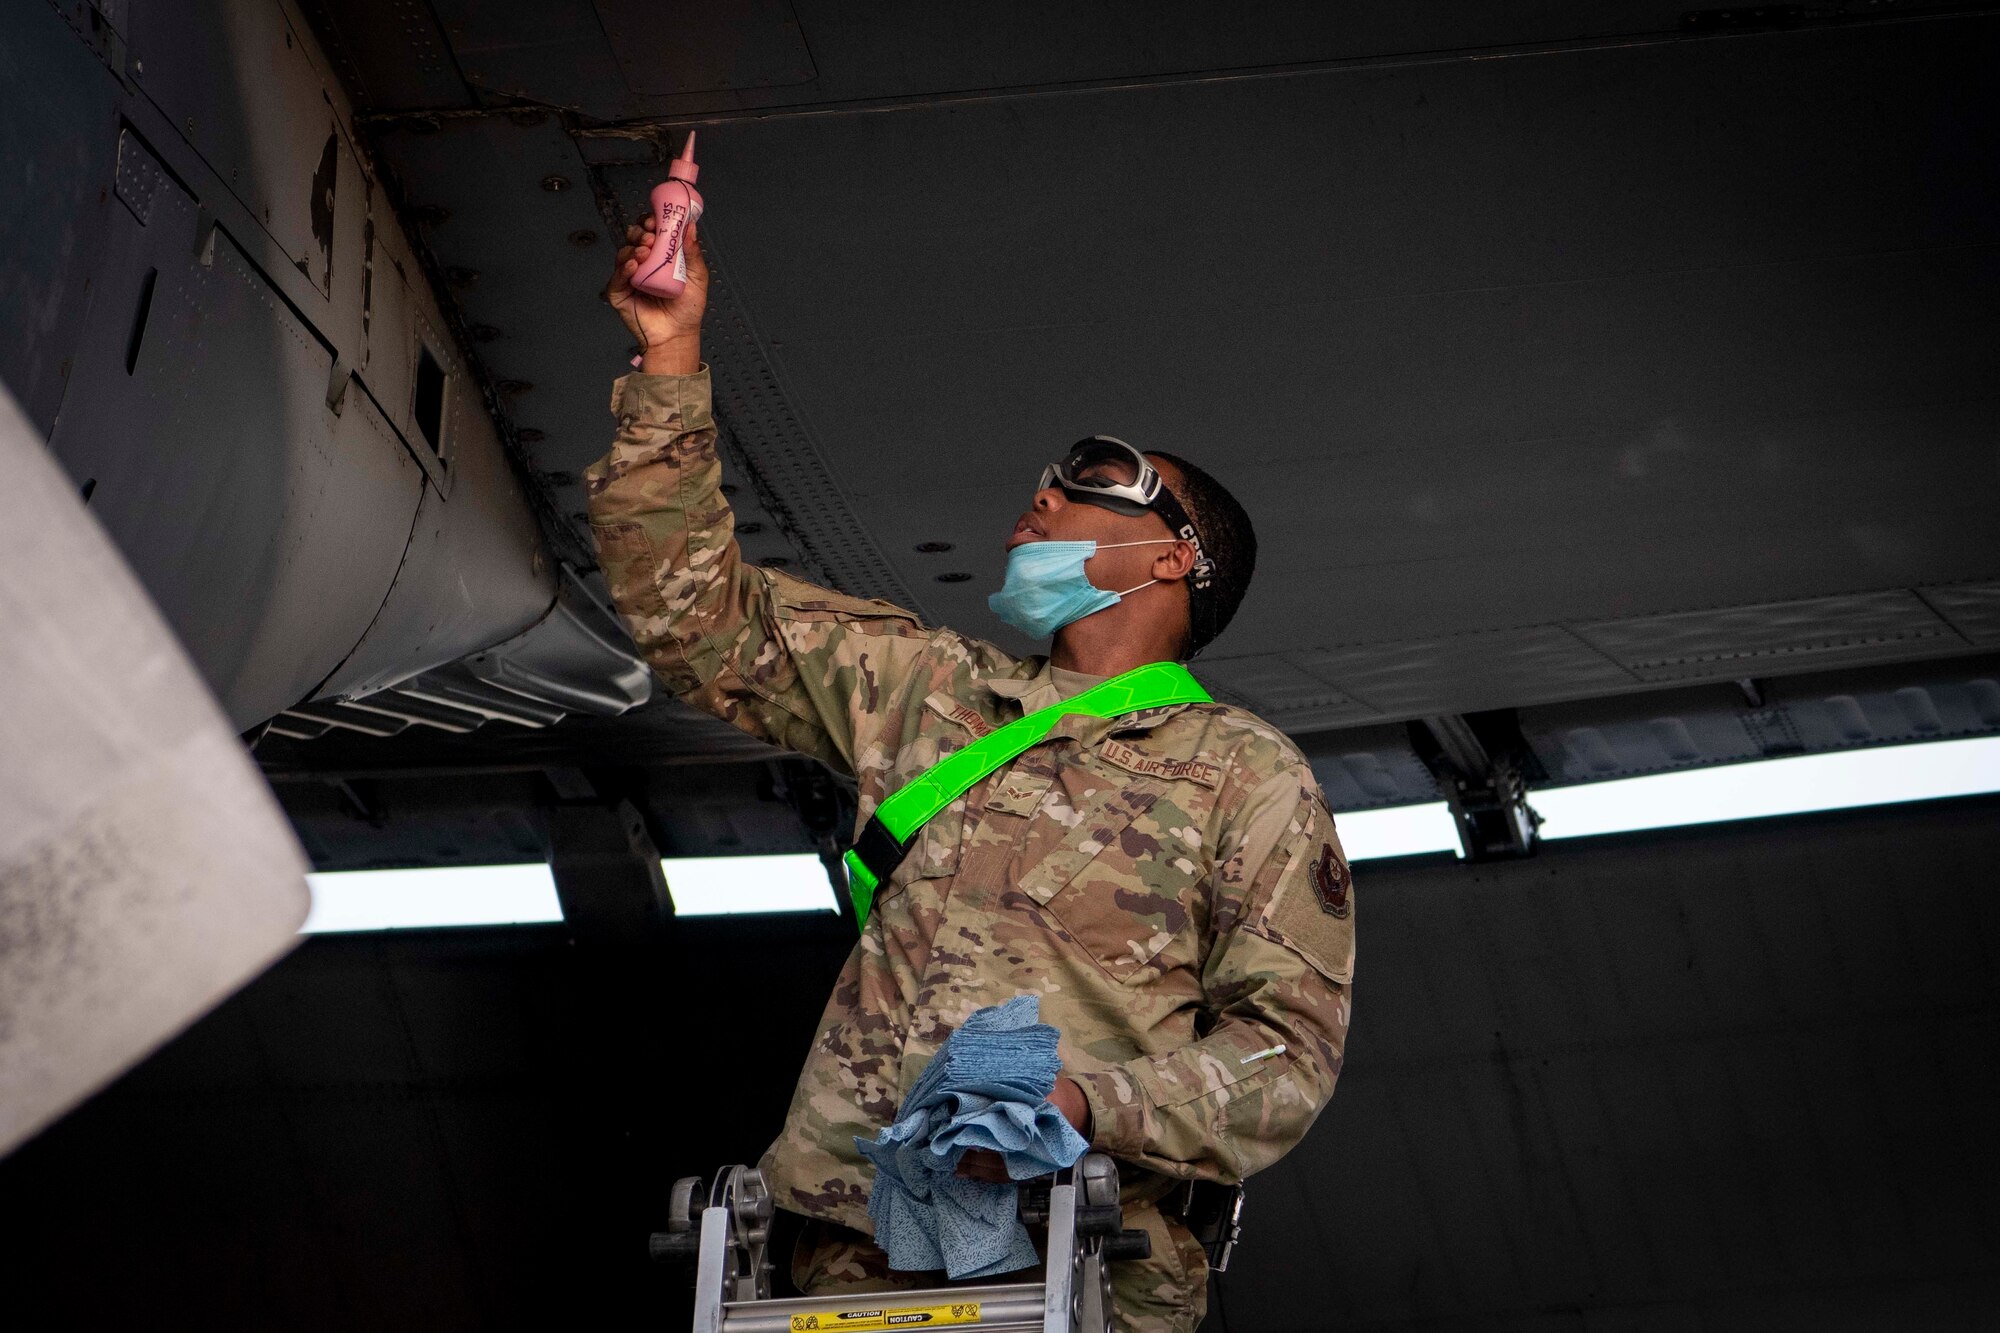 U.S. Air Force Airman 1st Class Justin Thomas, a fuel systems apprentice assigned to the 1st Special Operations Maintenance Squadron, applies talcum powder to the wing of an MC-130H Combat Talon II to check for a fuel leak at Hurlburt Field, Florida, April 5, 2021.